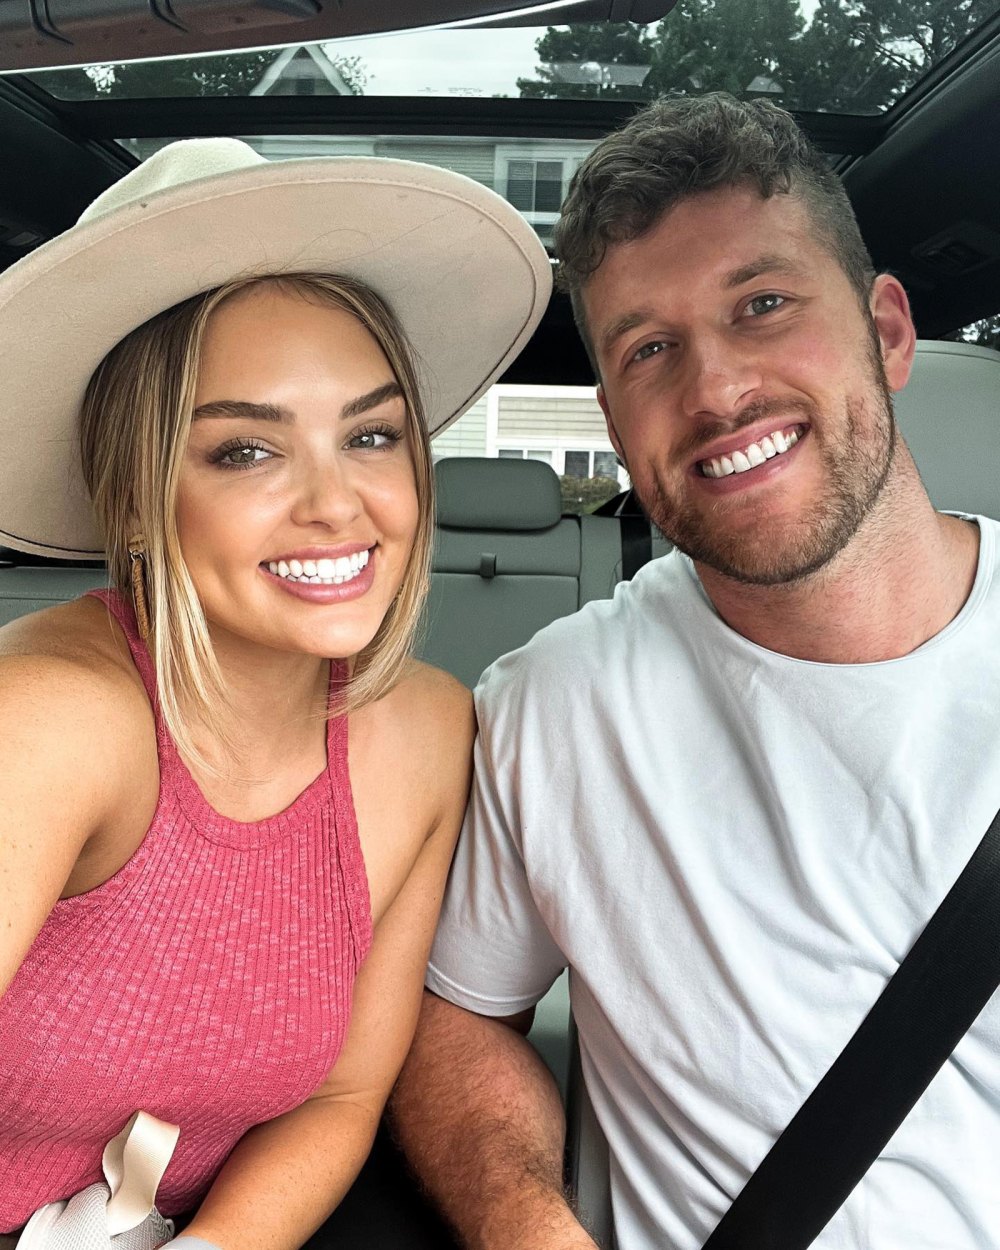 Susie Evans Questions Why Clayton Echard Picked Her on 'The Bachelor': He's 'Way More Compatible' With Rachel Recchia